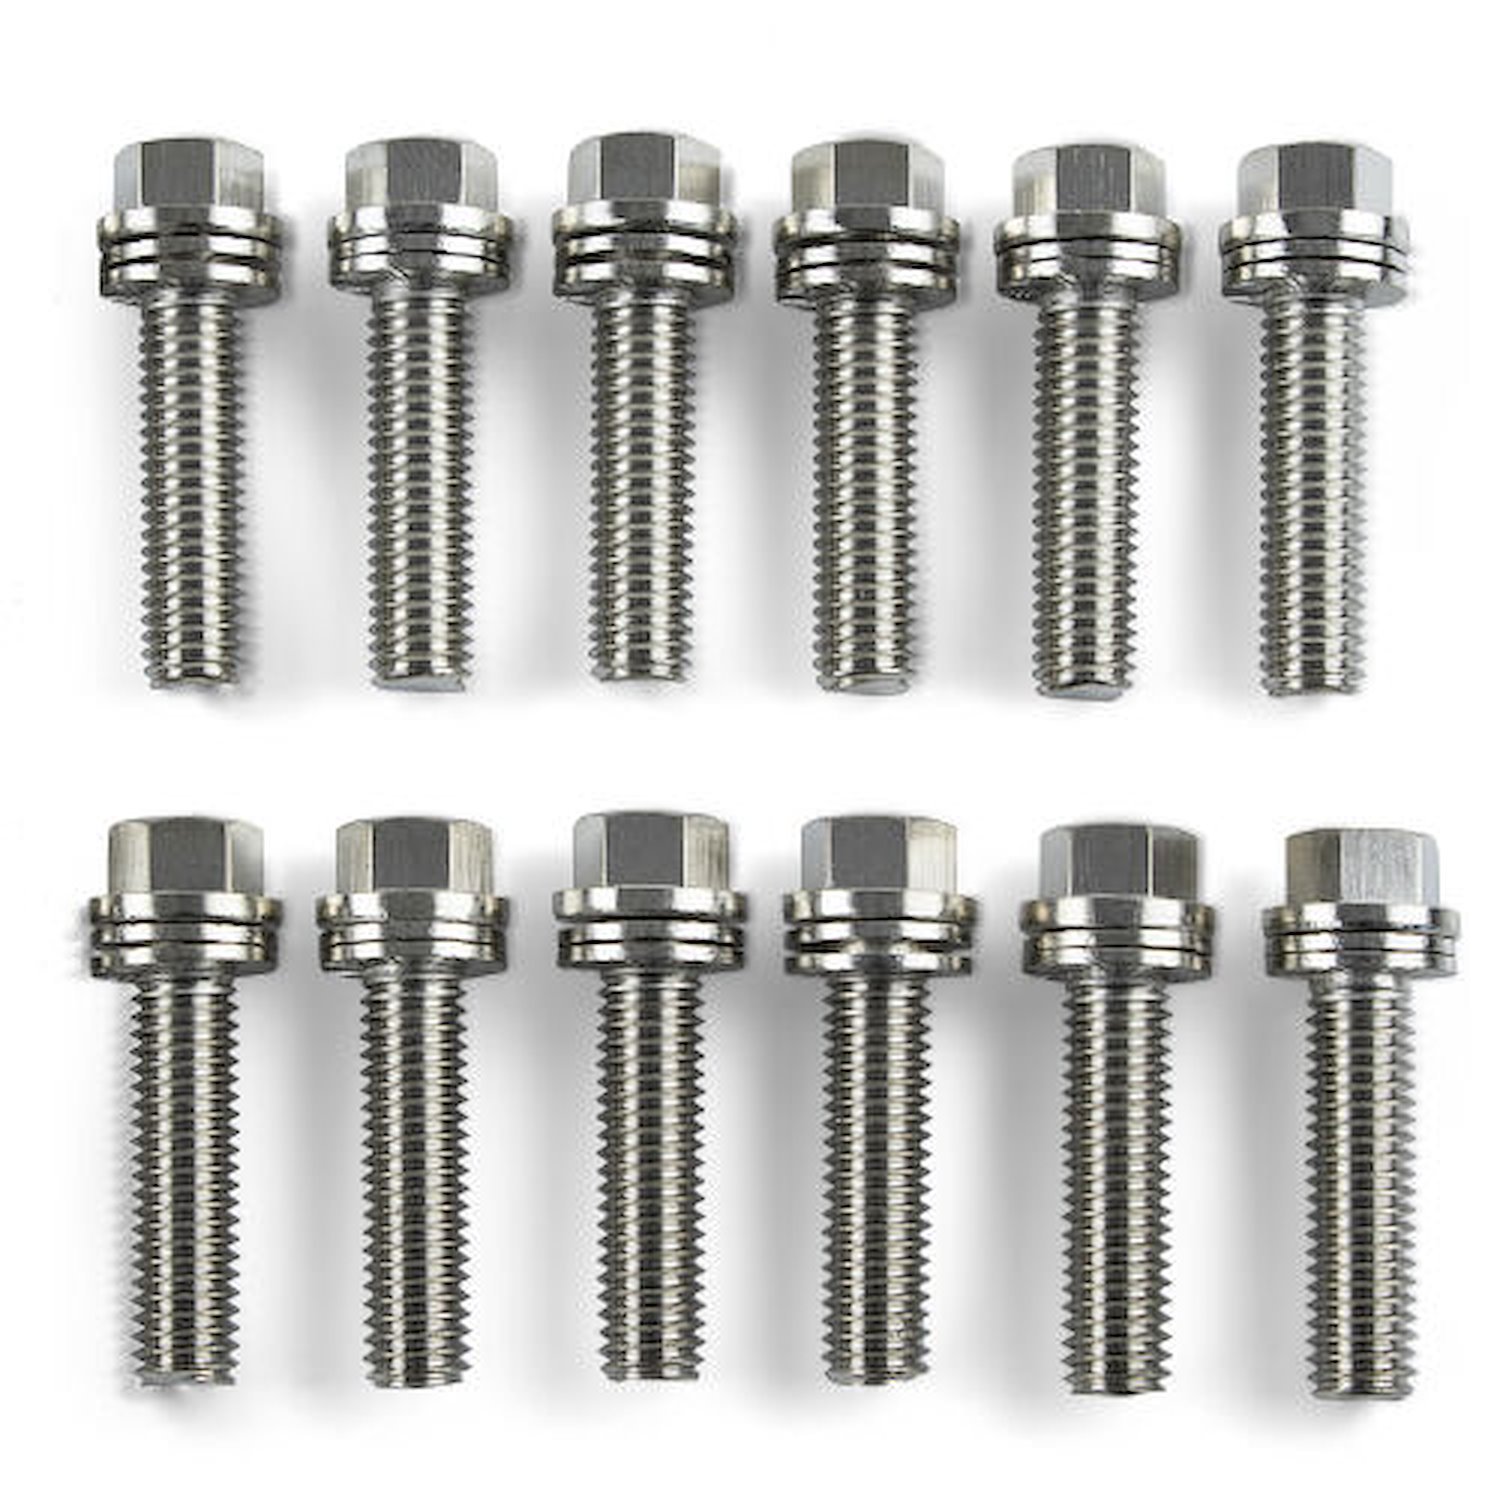 66824  Wedge-Locking Header Bolts for Small Block Chevy, Big Block Mopar, AMC, Buick, Olds, & Pontiac [3/8 in. x 1 in. Long]